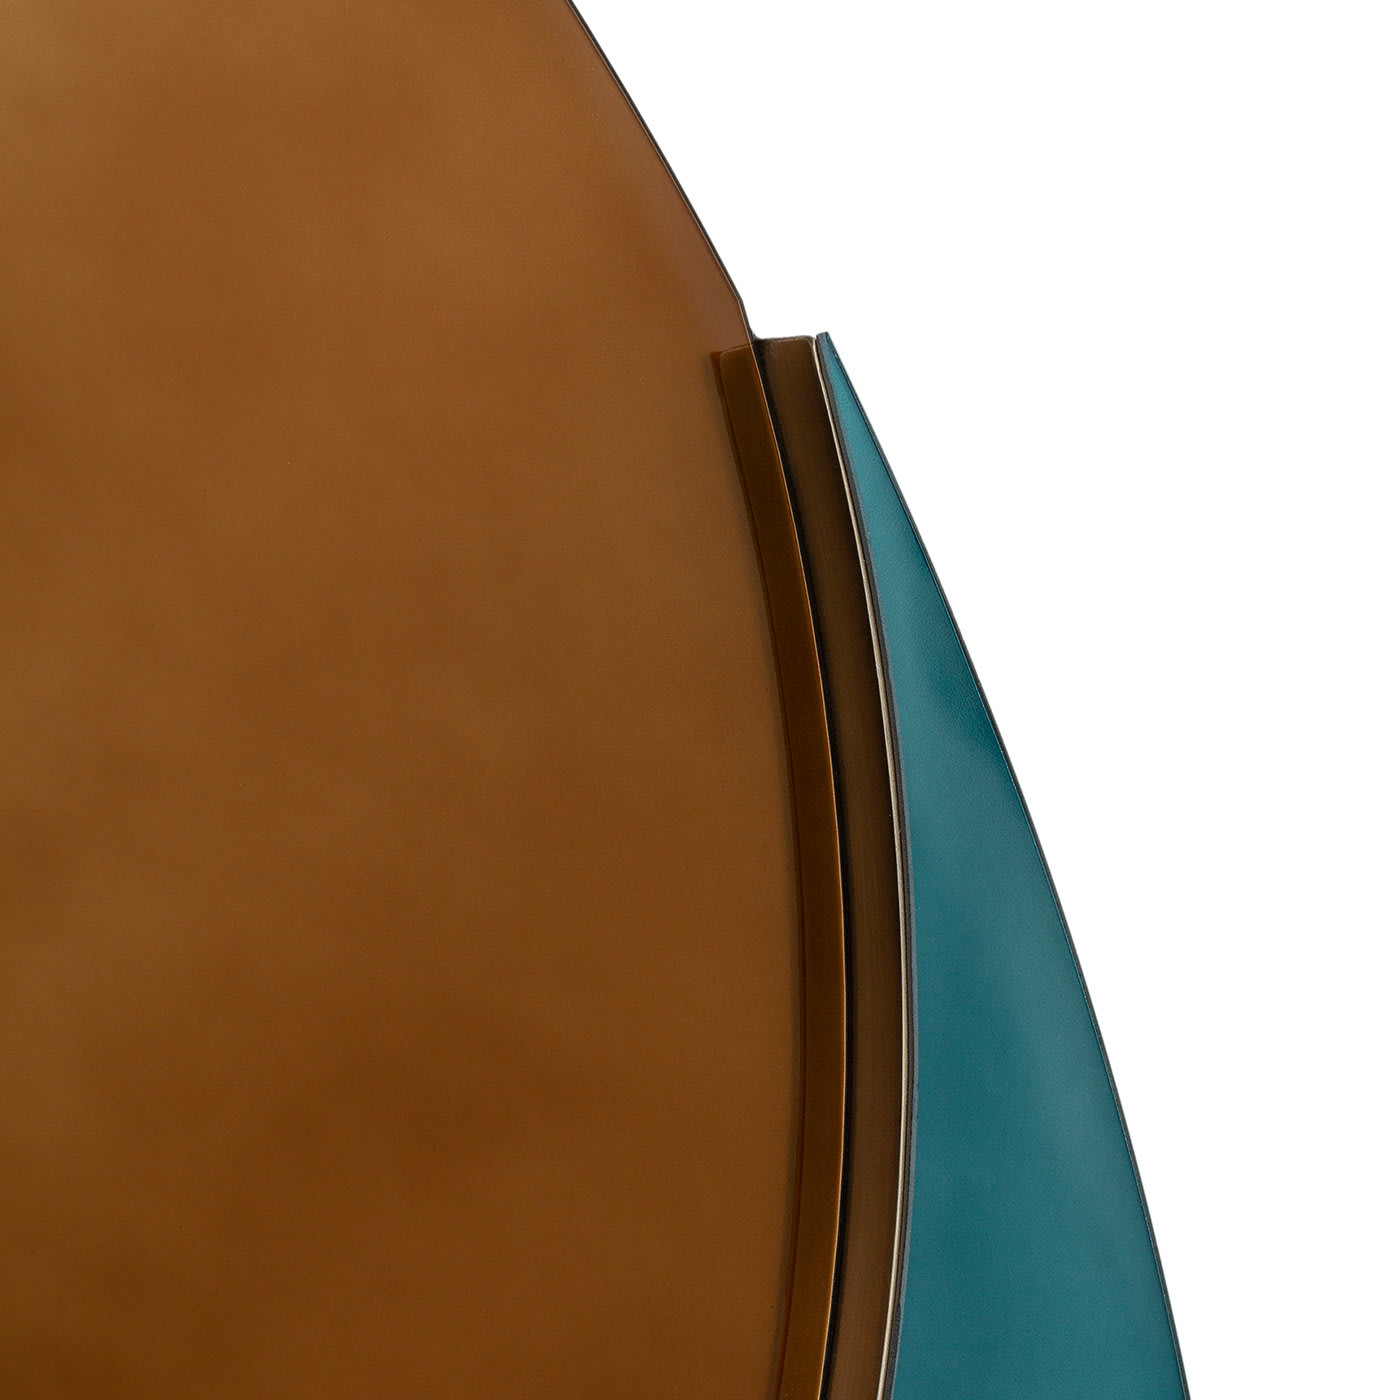 Duo Oval Mirror in Teal and Beige - Monica Madotto